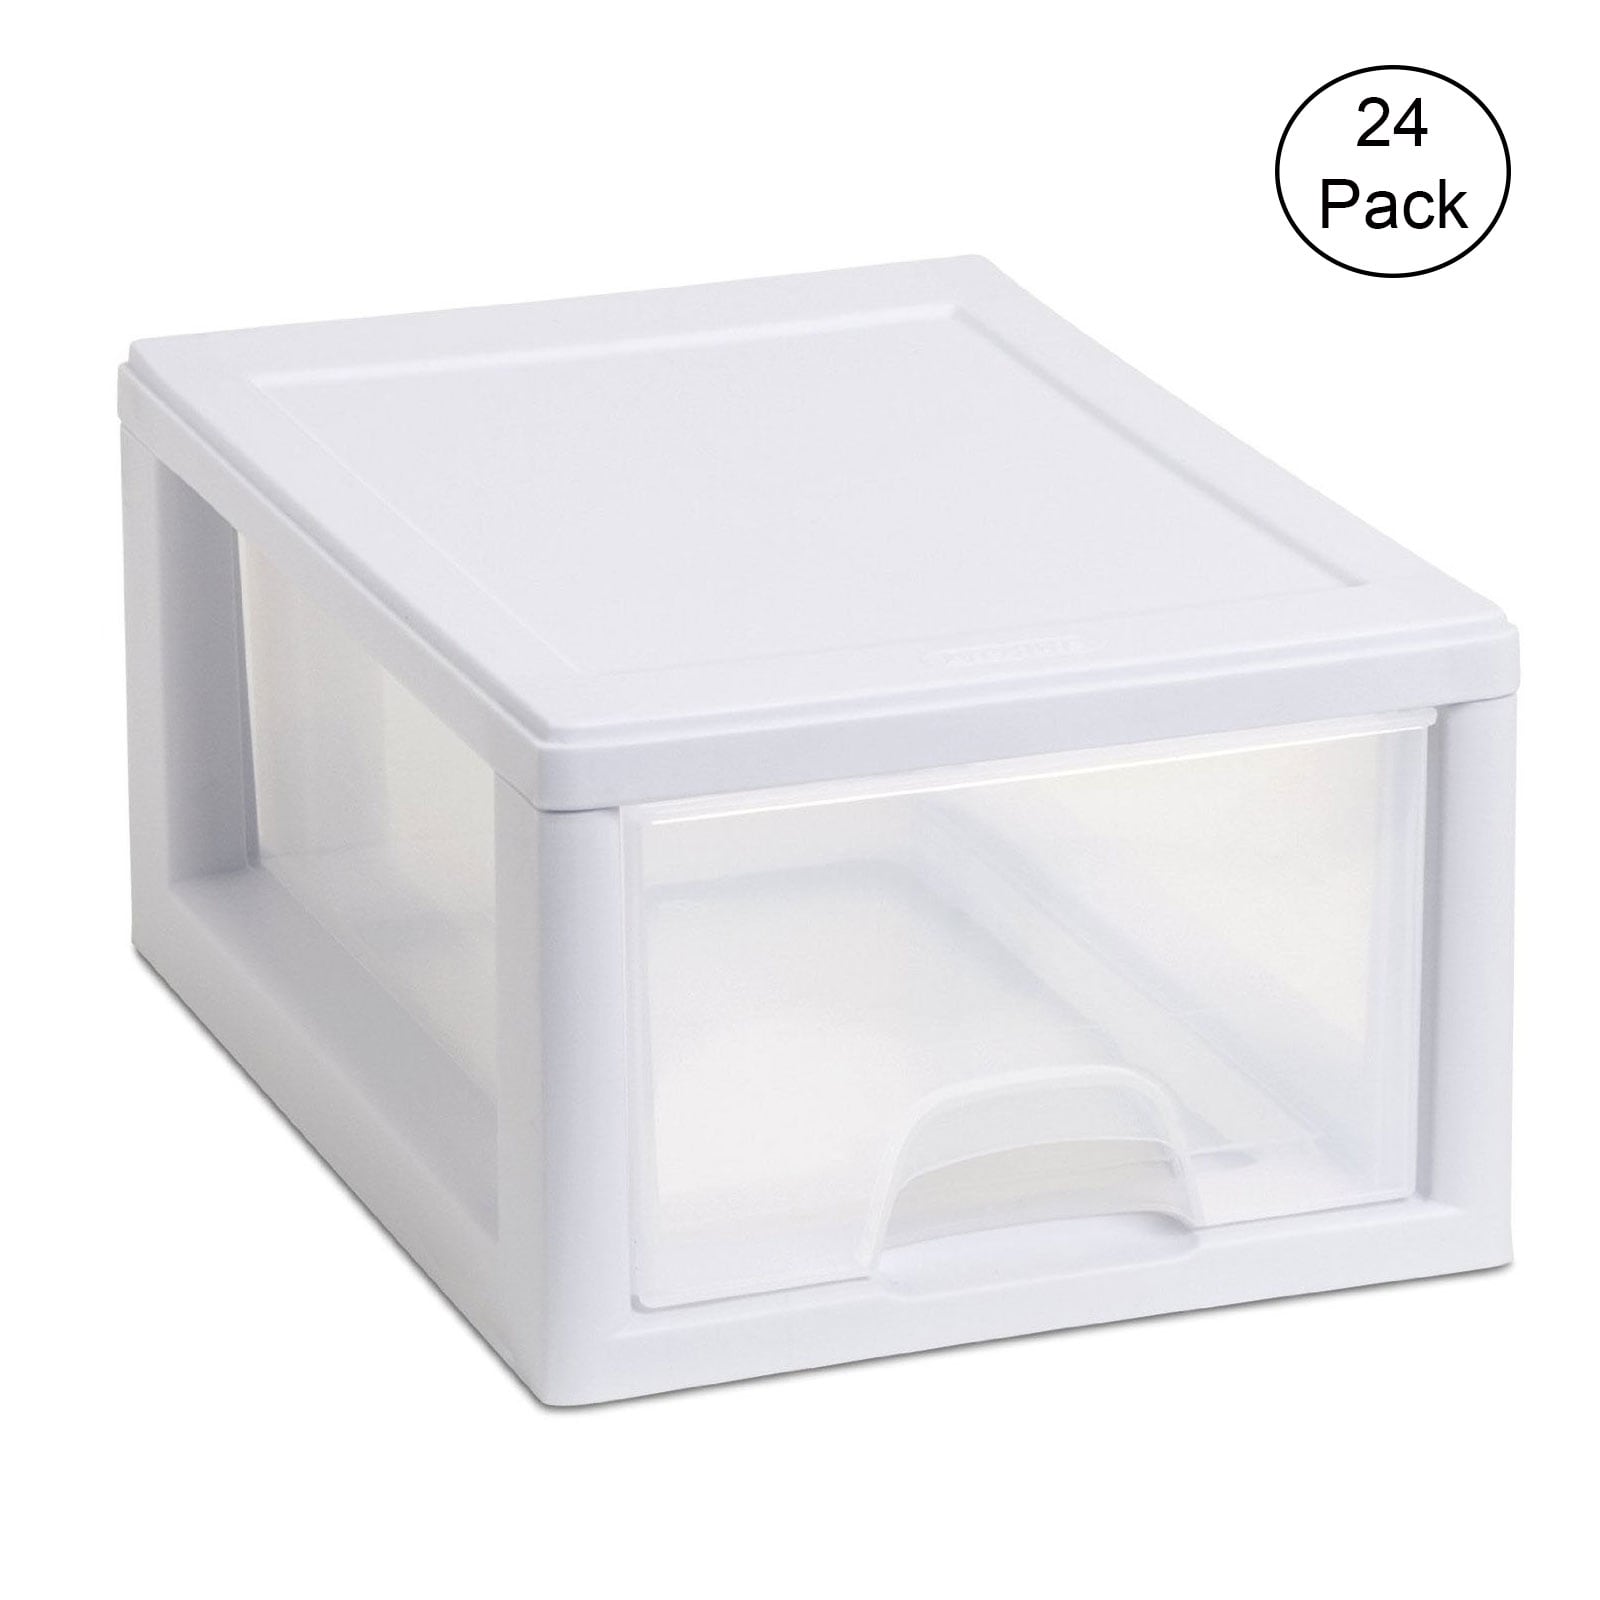 IRIS USA 3 Pack 15qt Stackable Plastic Storage Drawers, White, 3